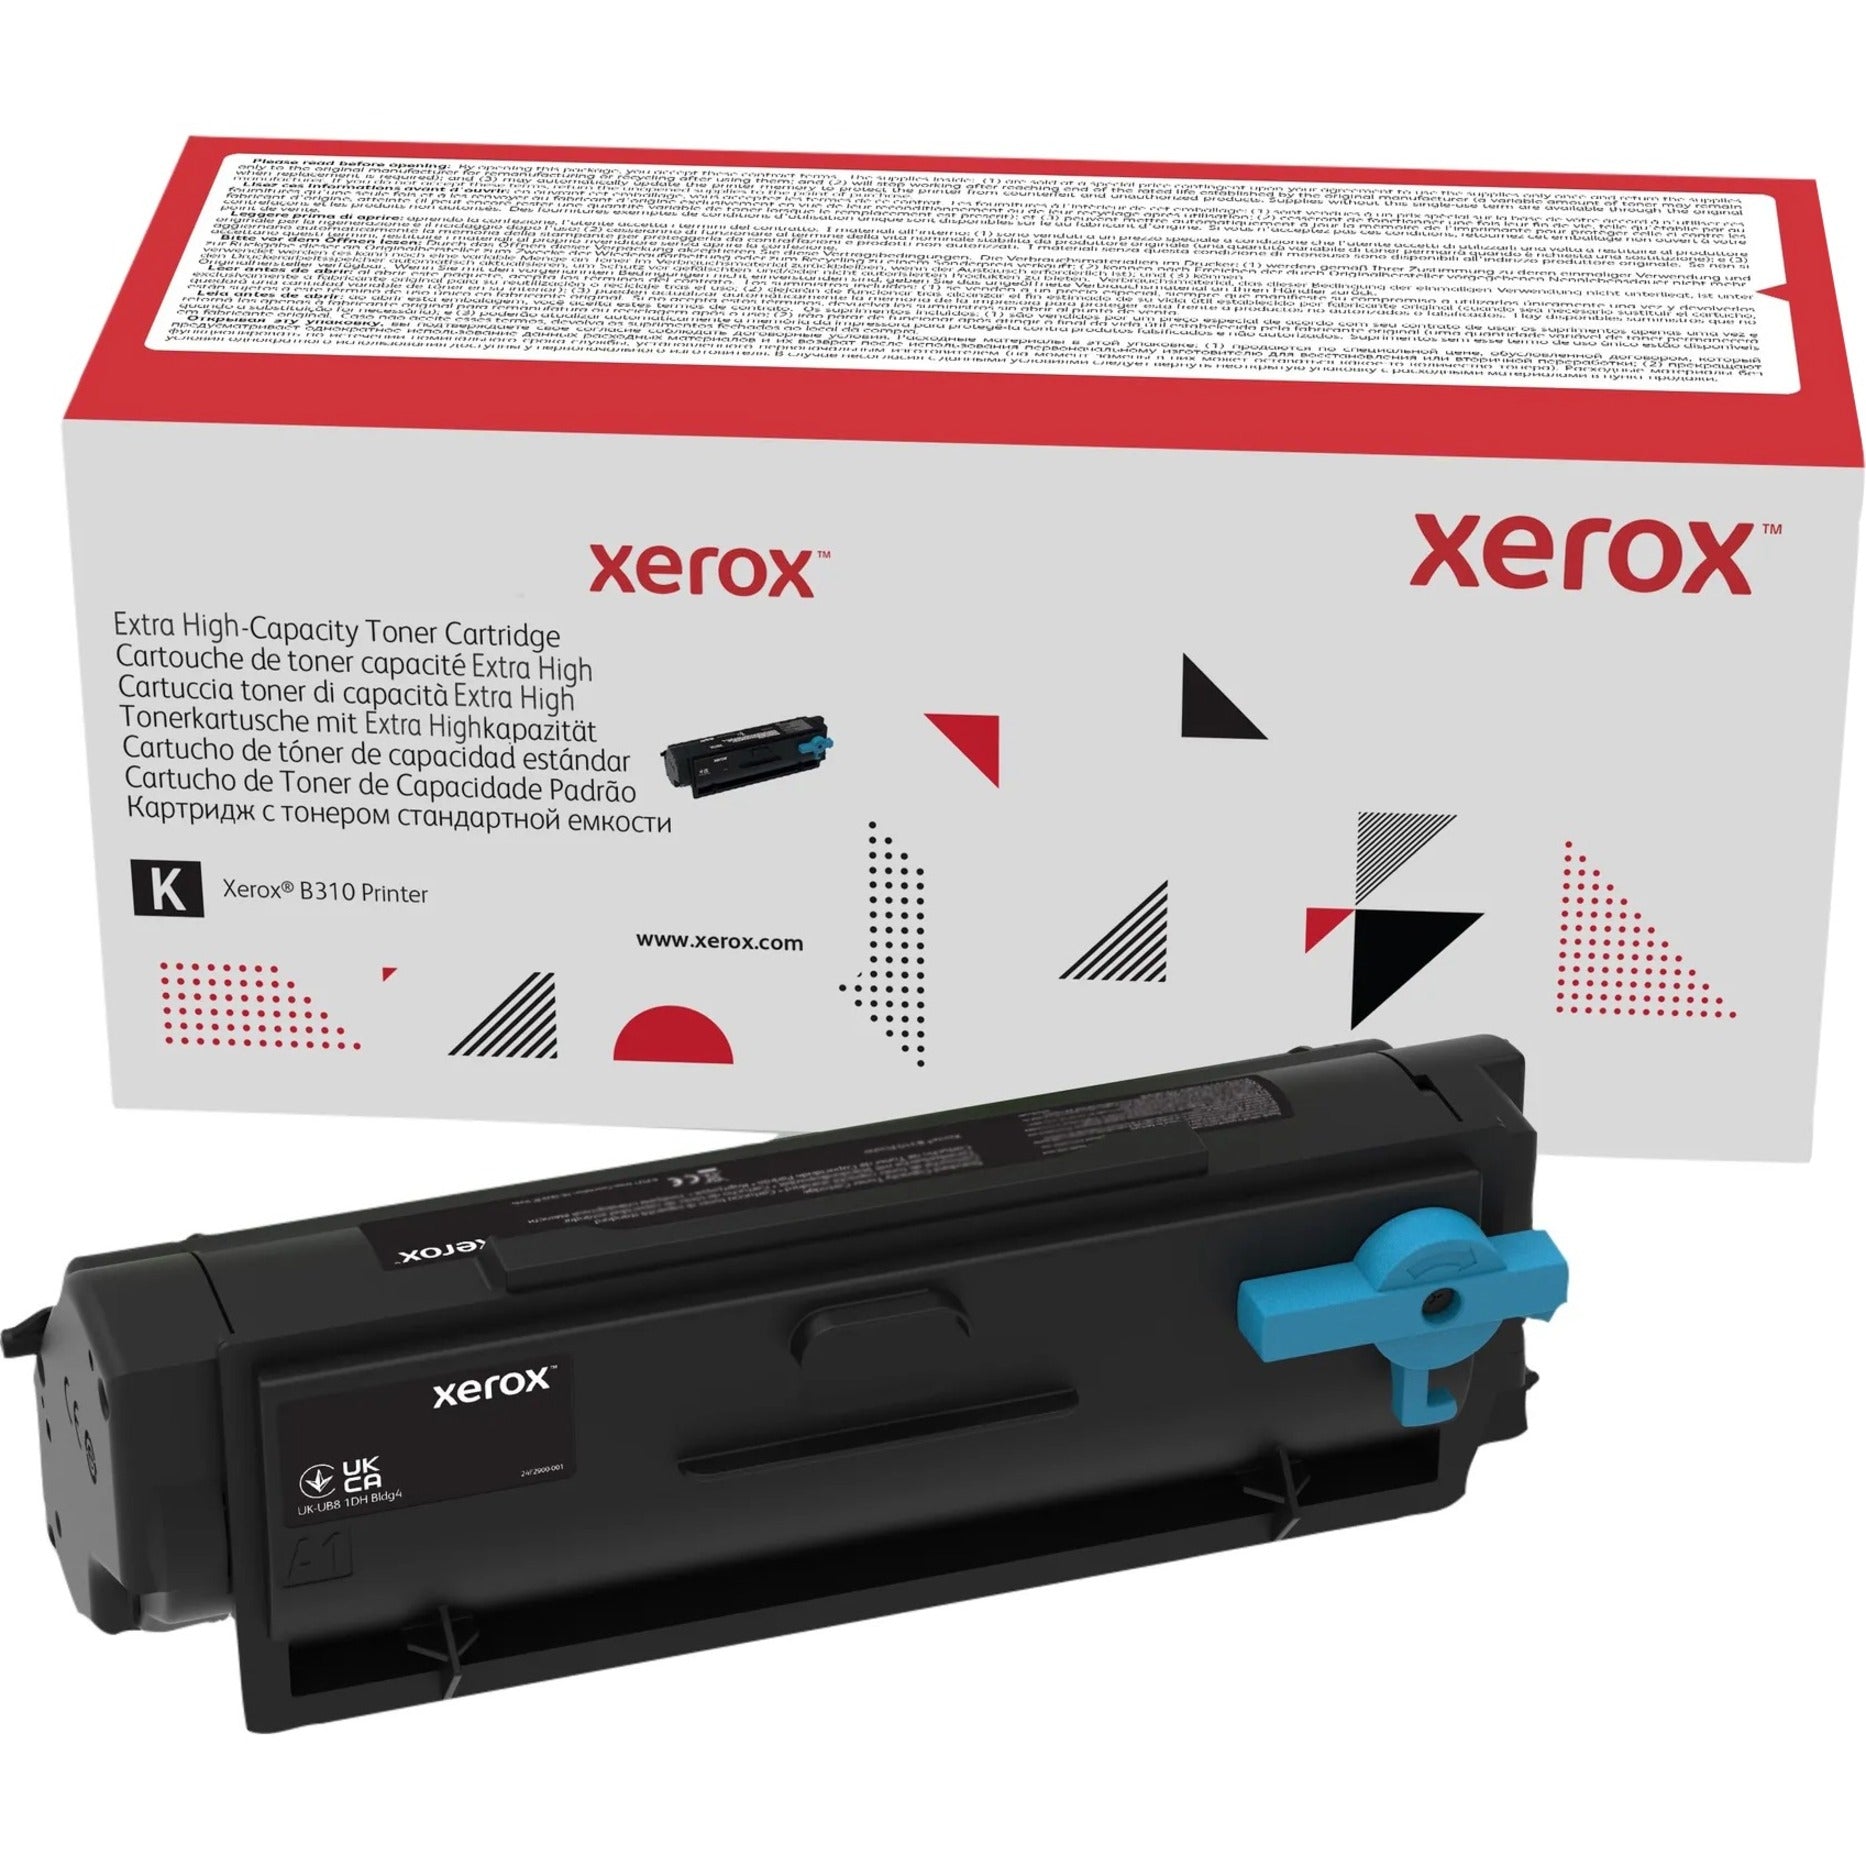 Xerox 006R04378 Toner Cartridge, Extra High Yield, Black - 1 Pack (20000 Pages)